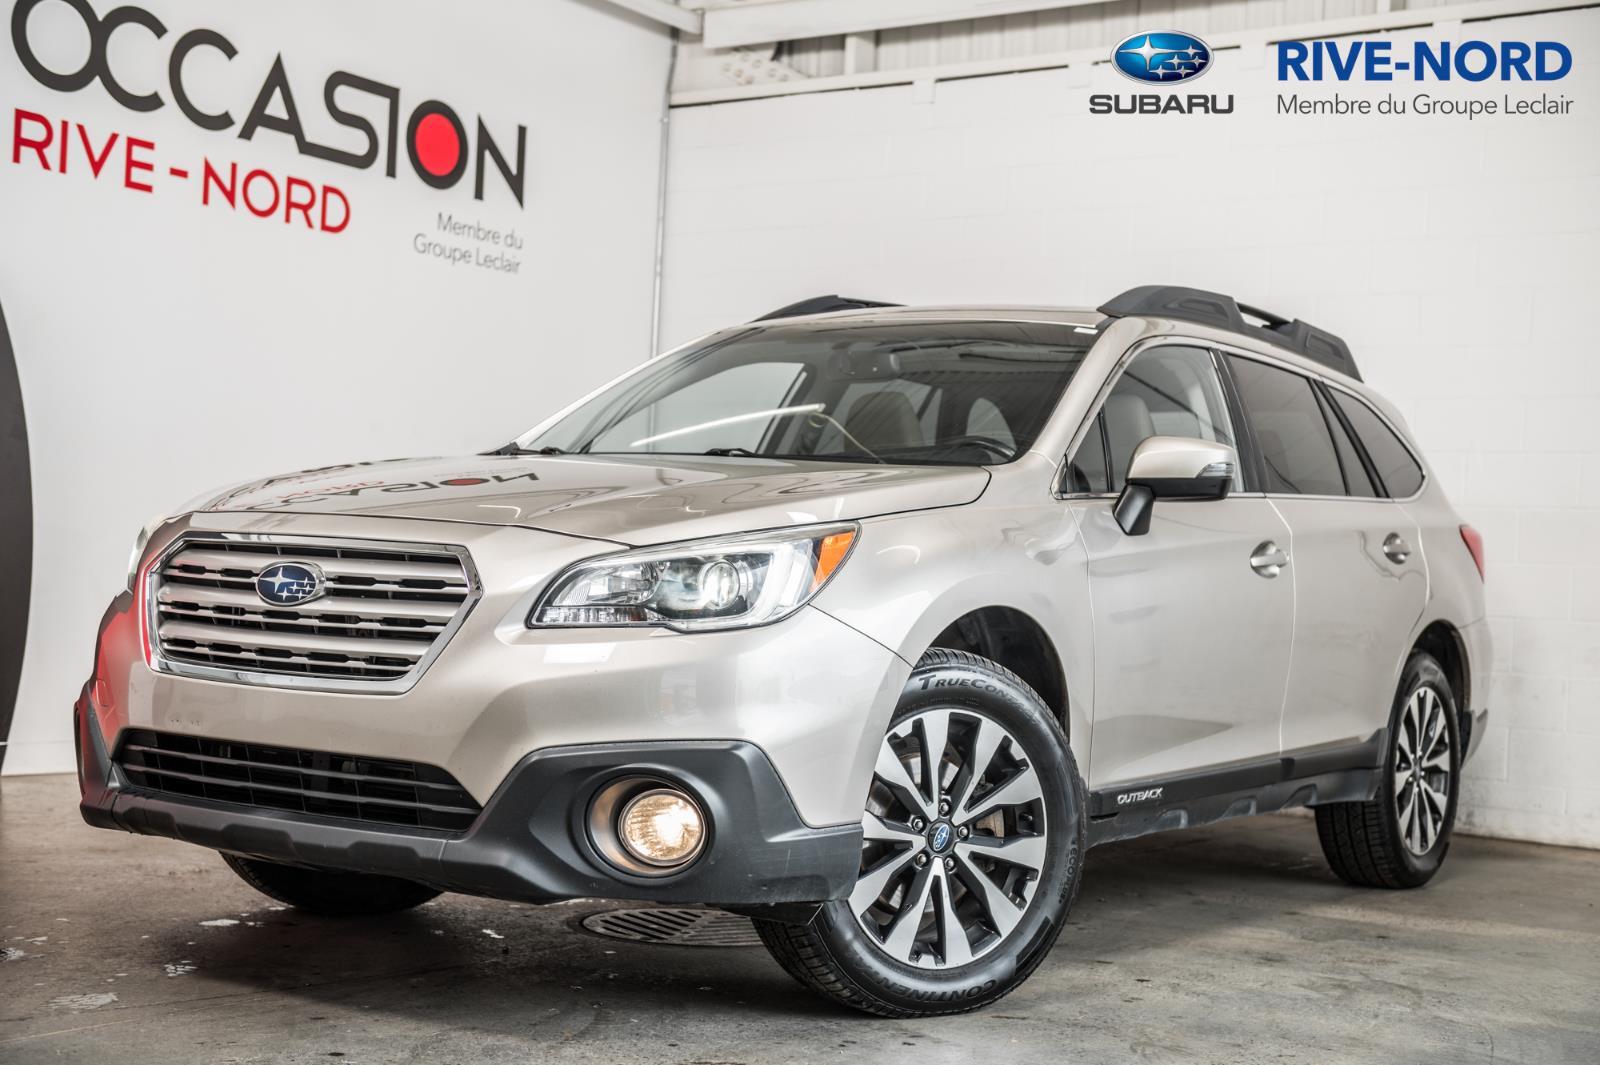 2017 Subaru Outback Limited NAVI+CUIR+TOIT.OUVRANT